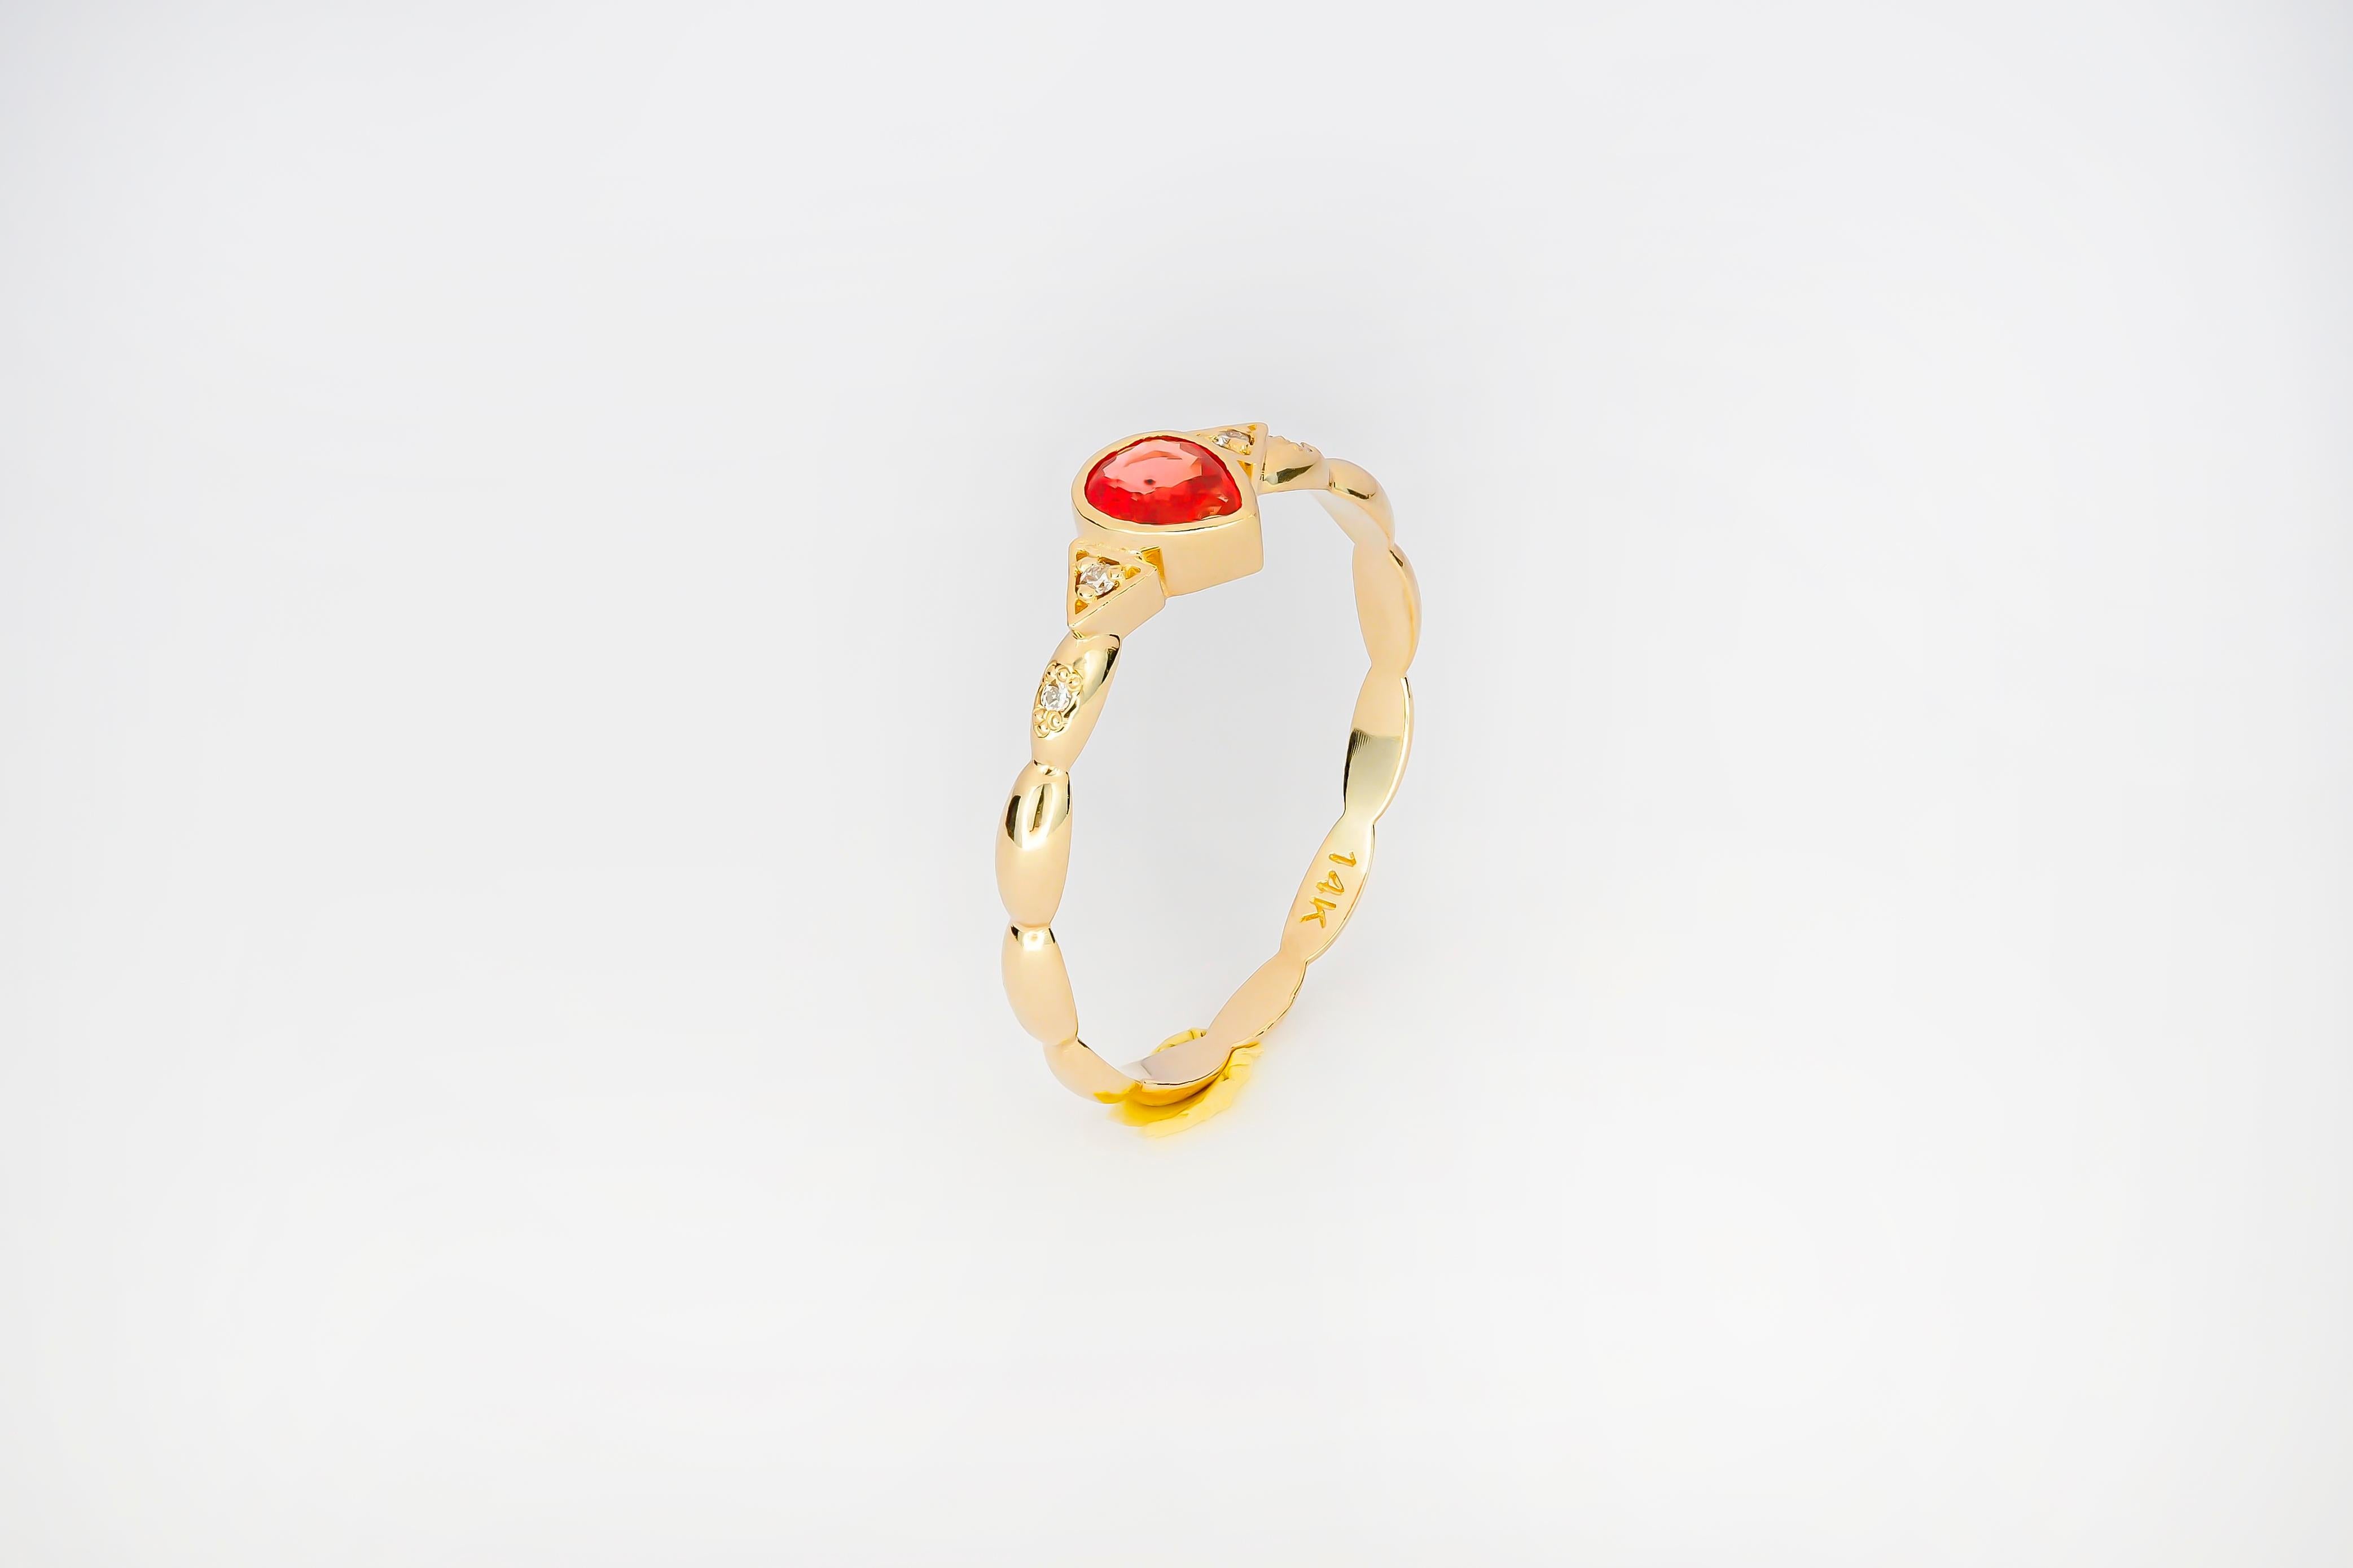 Pear sapphire 14k gold ring.  4